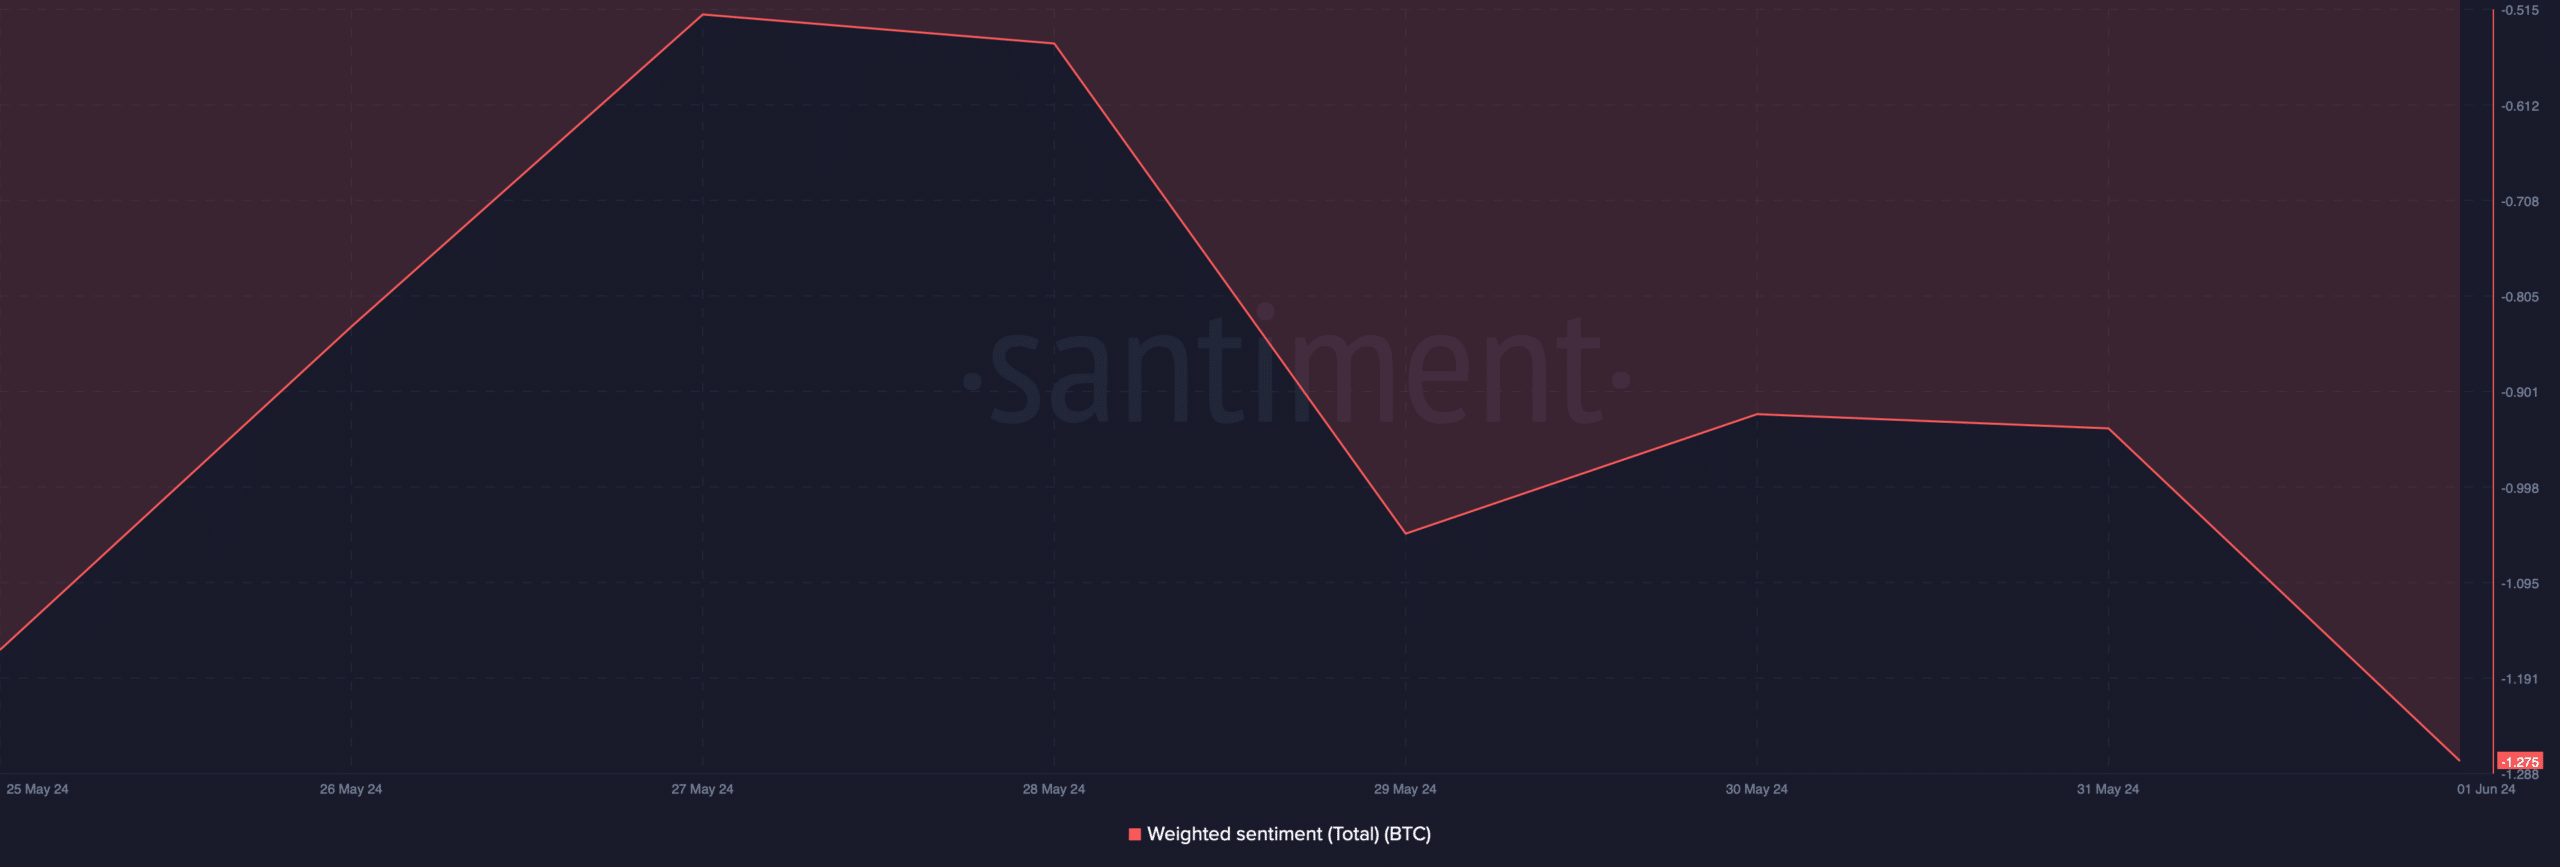 BTC's weighted sentiment dropped 